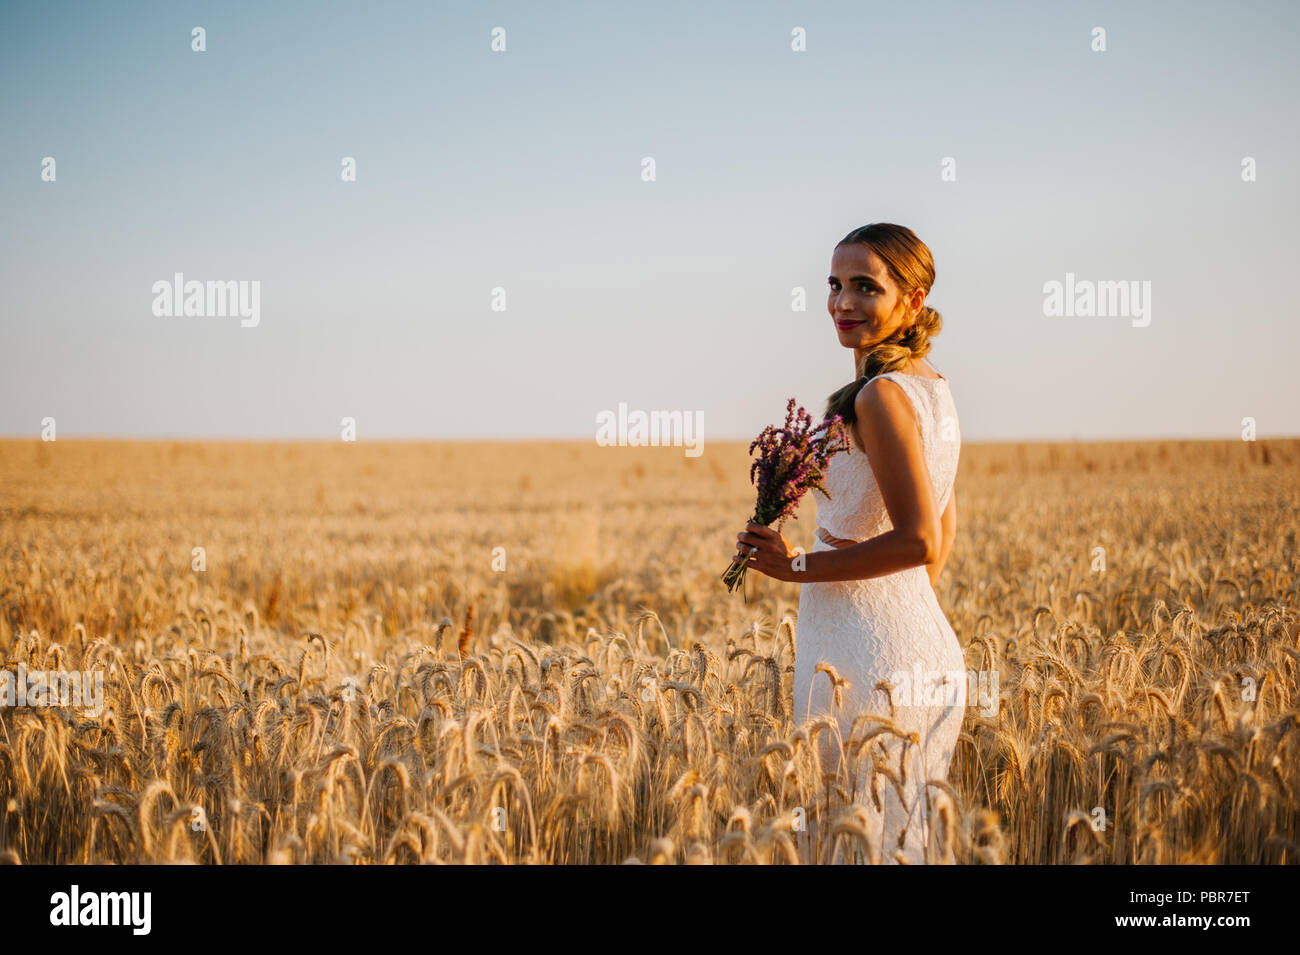 Bride shooting with a bouquet in a field Stock Photo